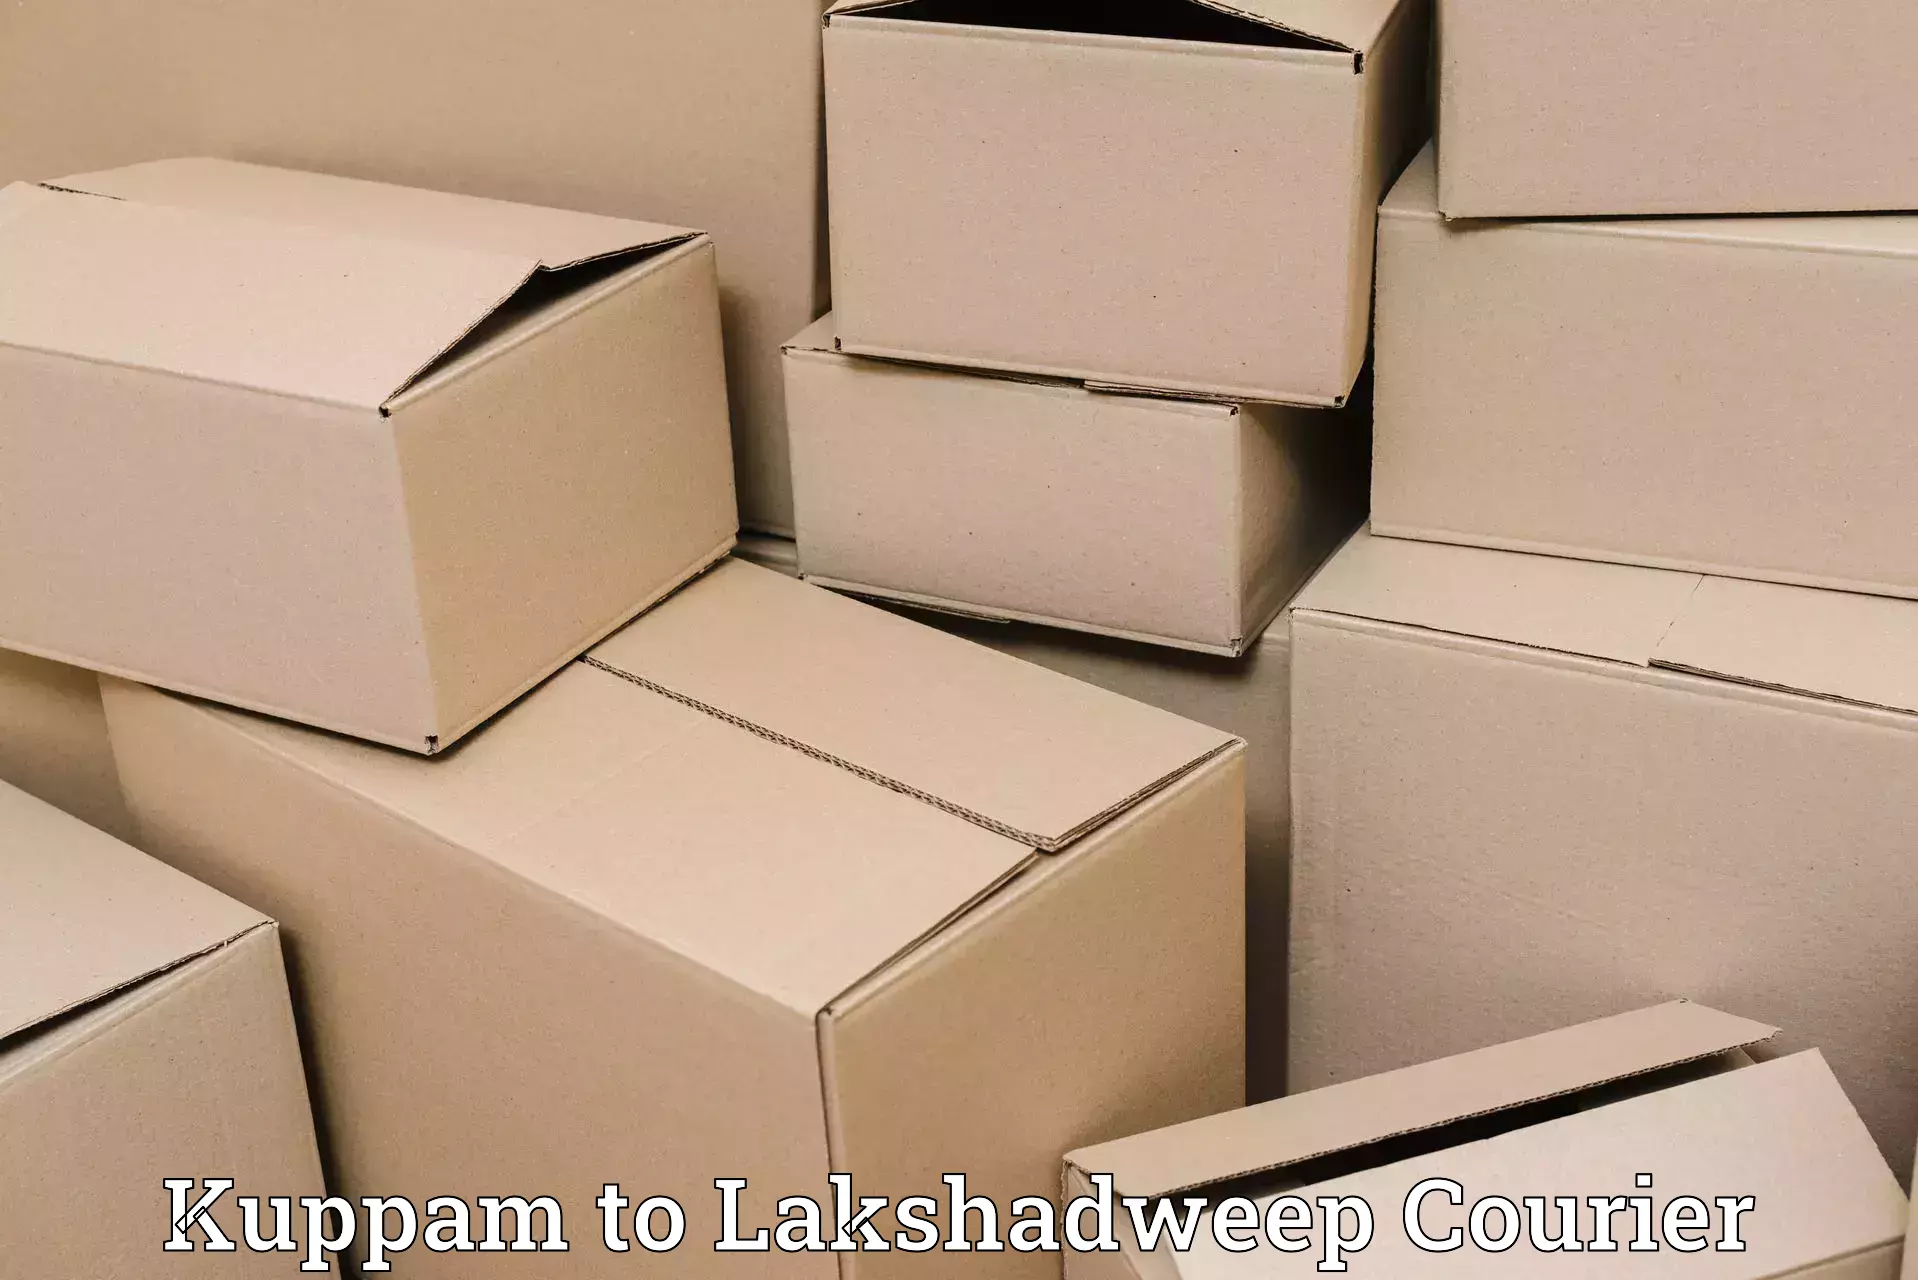 Same-day delivery solutions Kuppam to Lakshadweep